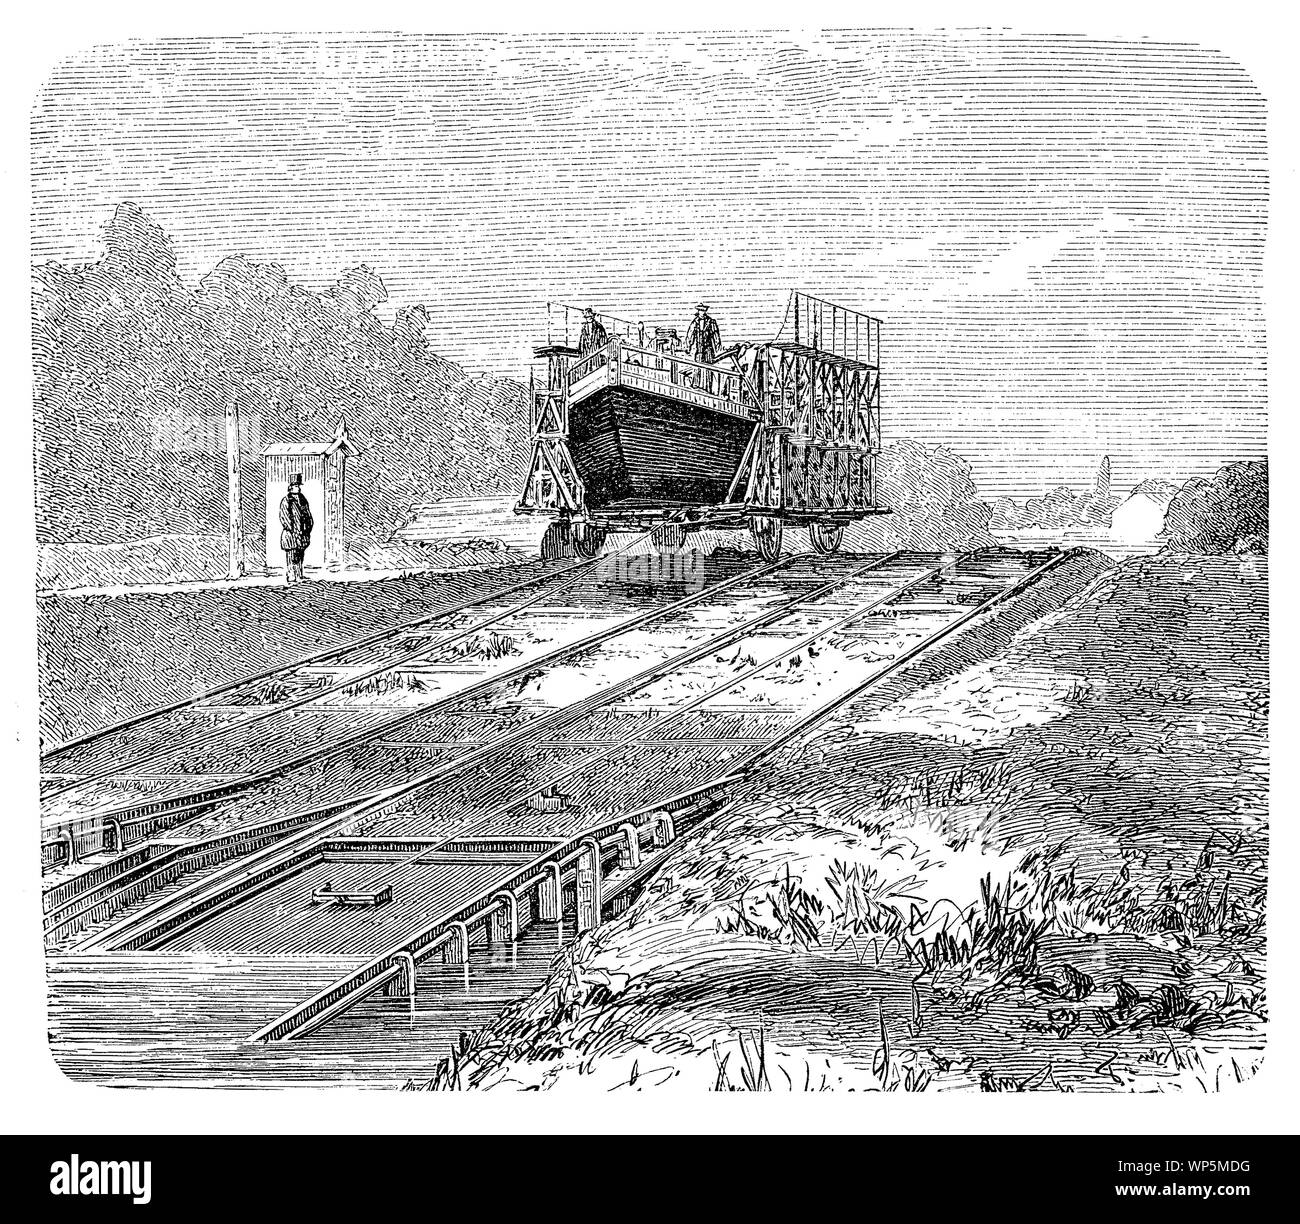 Ship on railtrack, land transport to Eilblag canal or Upland Canal built and opened in the year 1860 in the Prussia kingdom Stock Photo